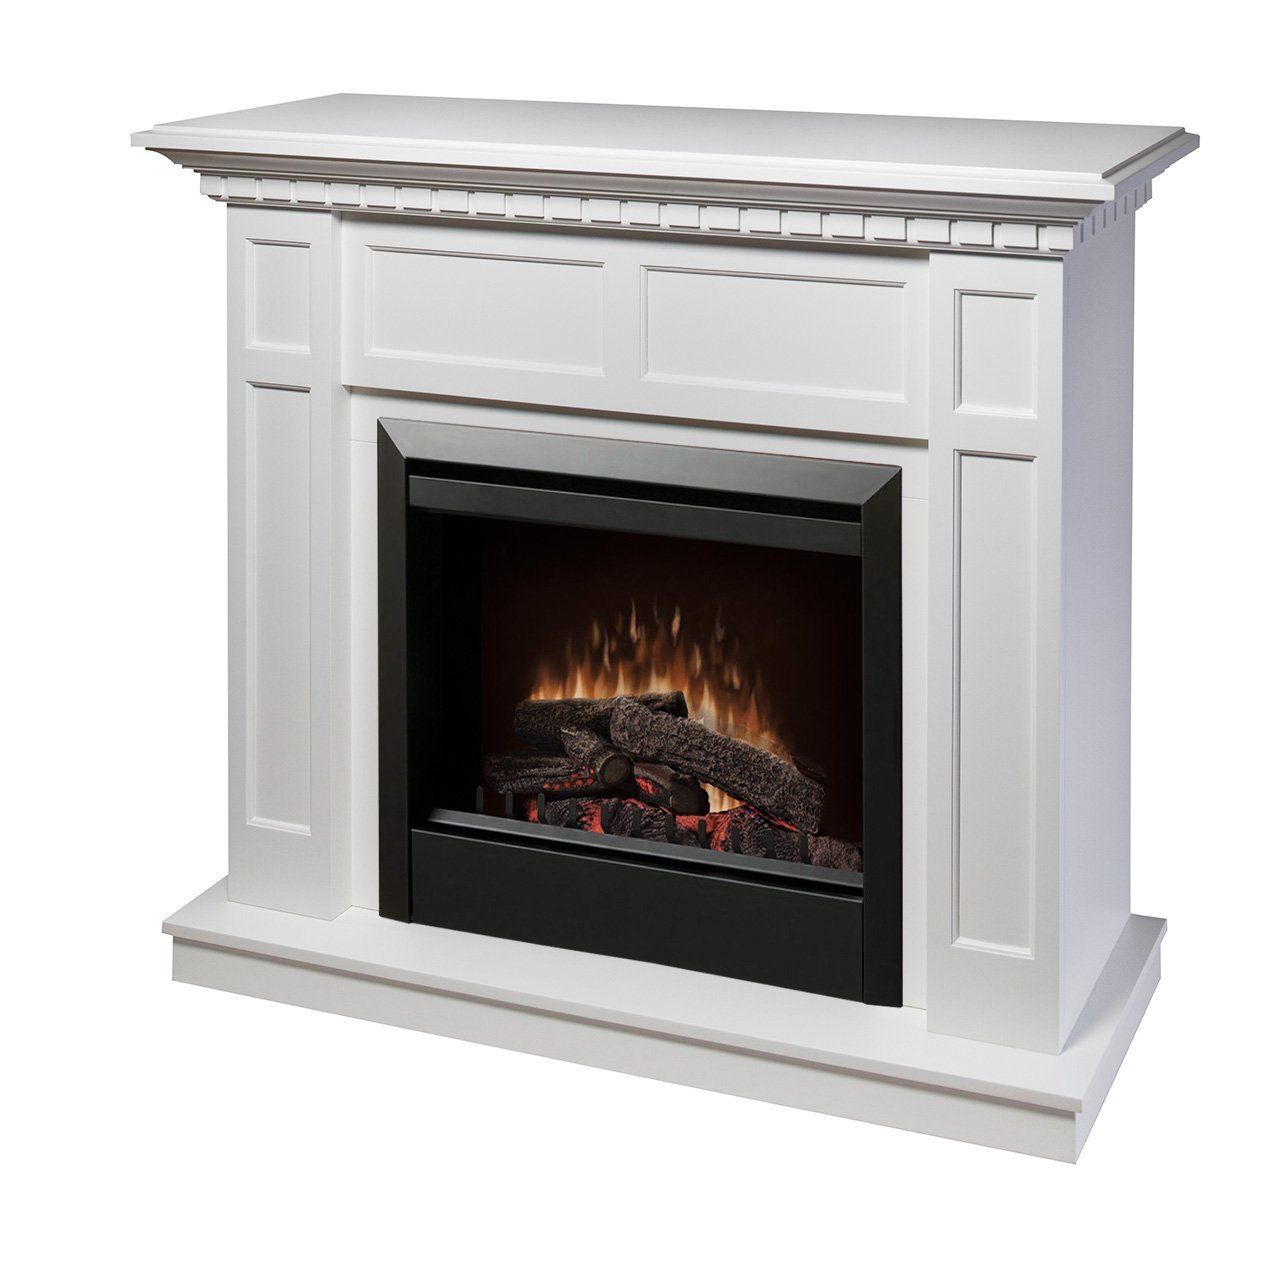 Wayfair Electric Fireplace Insert Best Of Dimplex Caprice 23" Electric Fireplace with Wooden Mantel